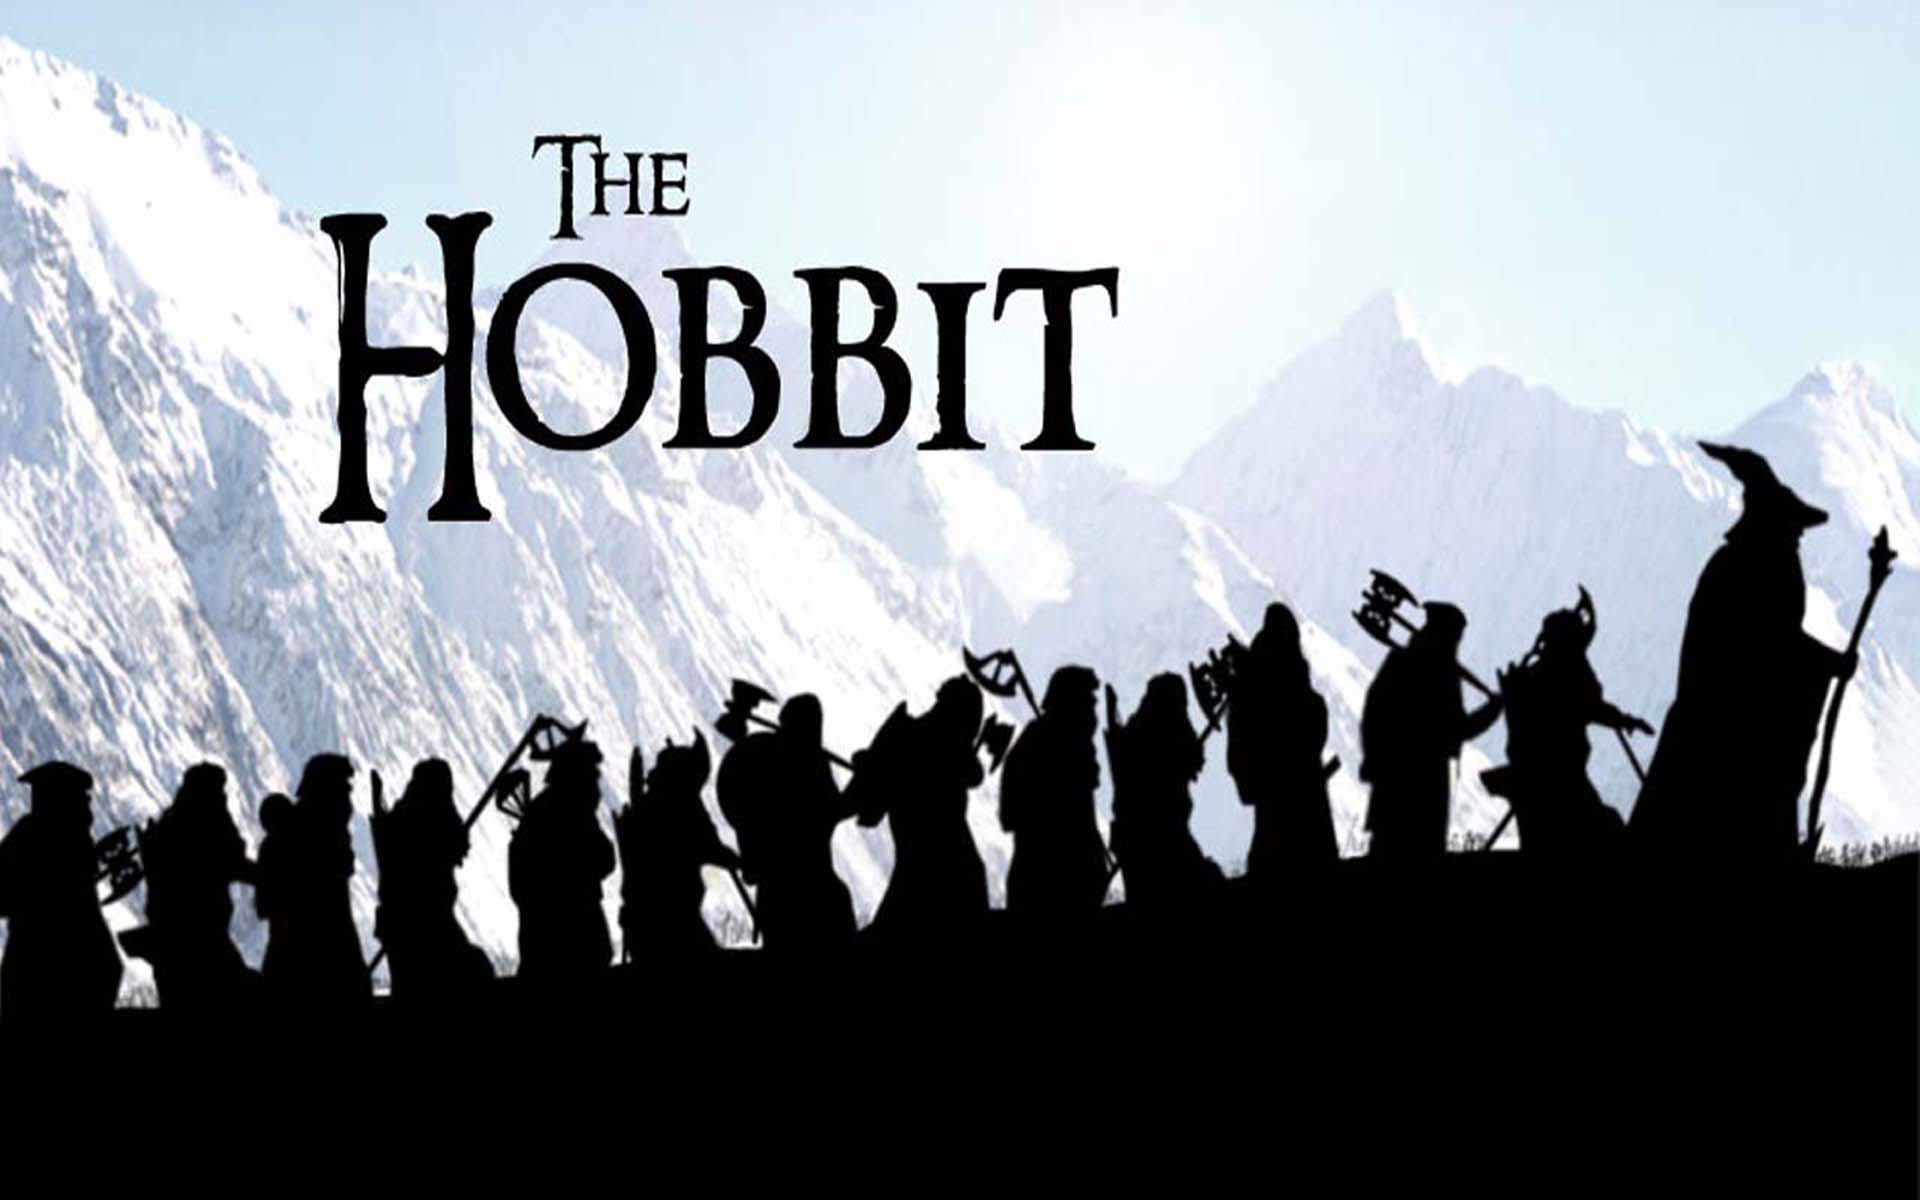 Unexpected journey. Хоббит. Хоббит силуэт. The Hobbit, or there and back again. Хоббит обои.